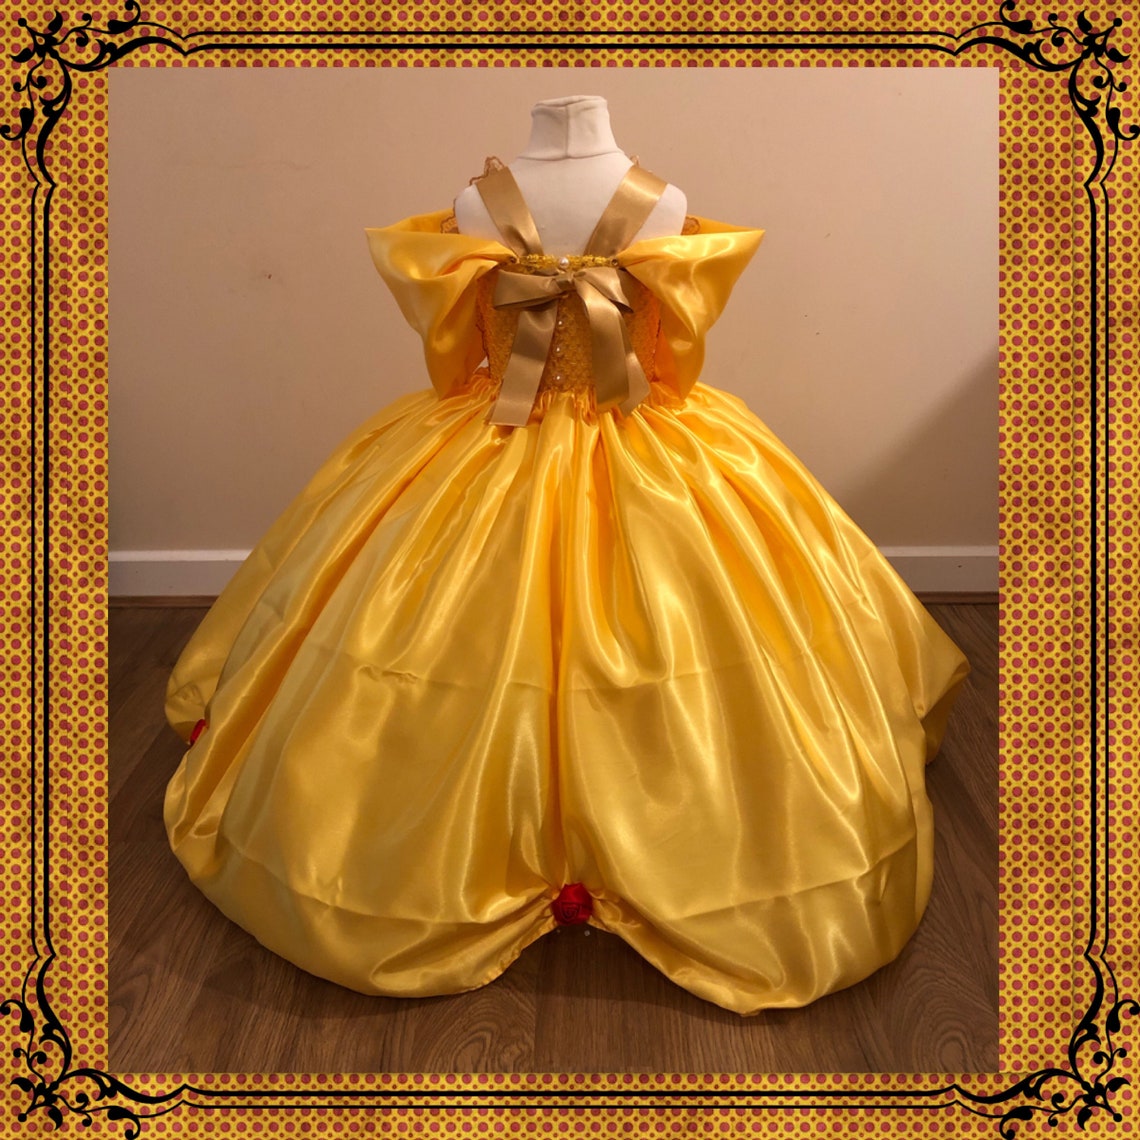 The Original Princess Belle From Beauty and the Beast Inspired - Etsy